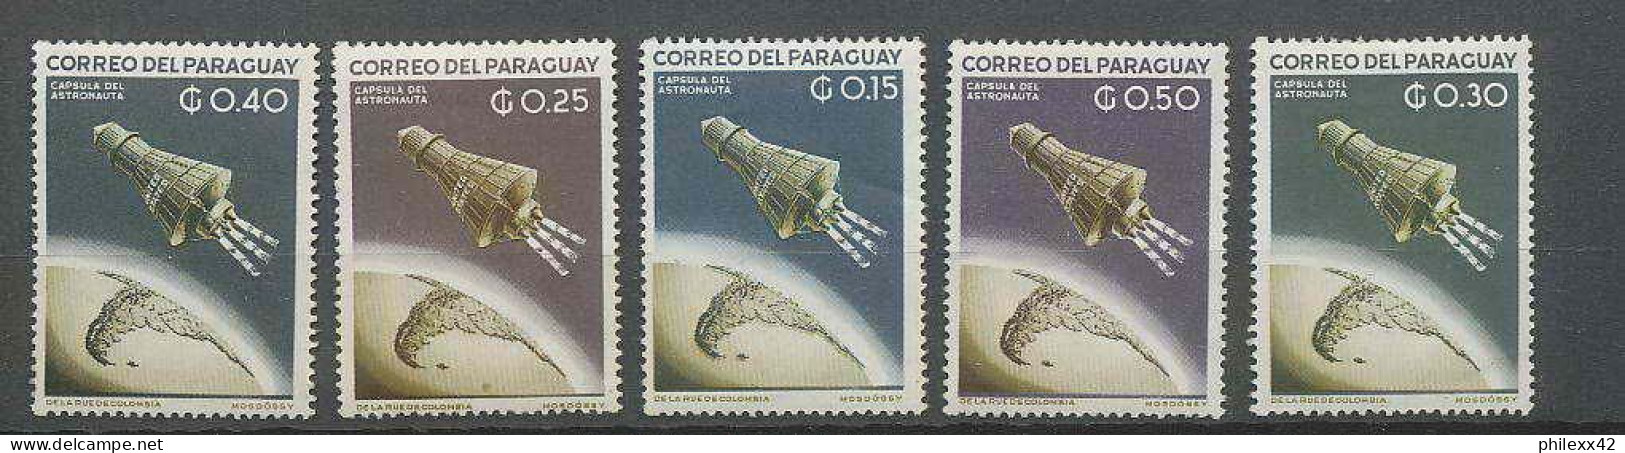 1218/ Espace (space) Neuf ** MNH Paraguay N° 1115/1119 Mercury - South America